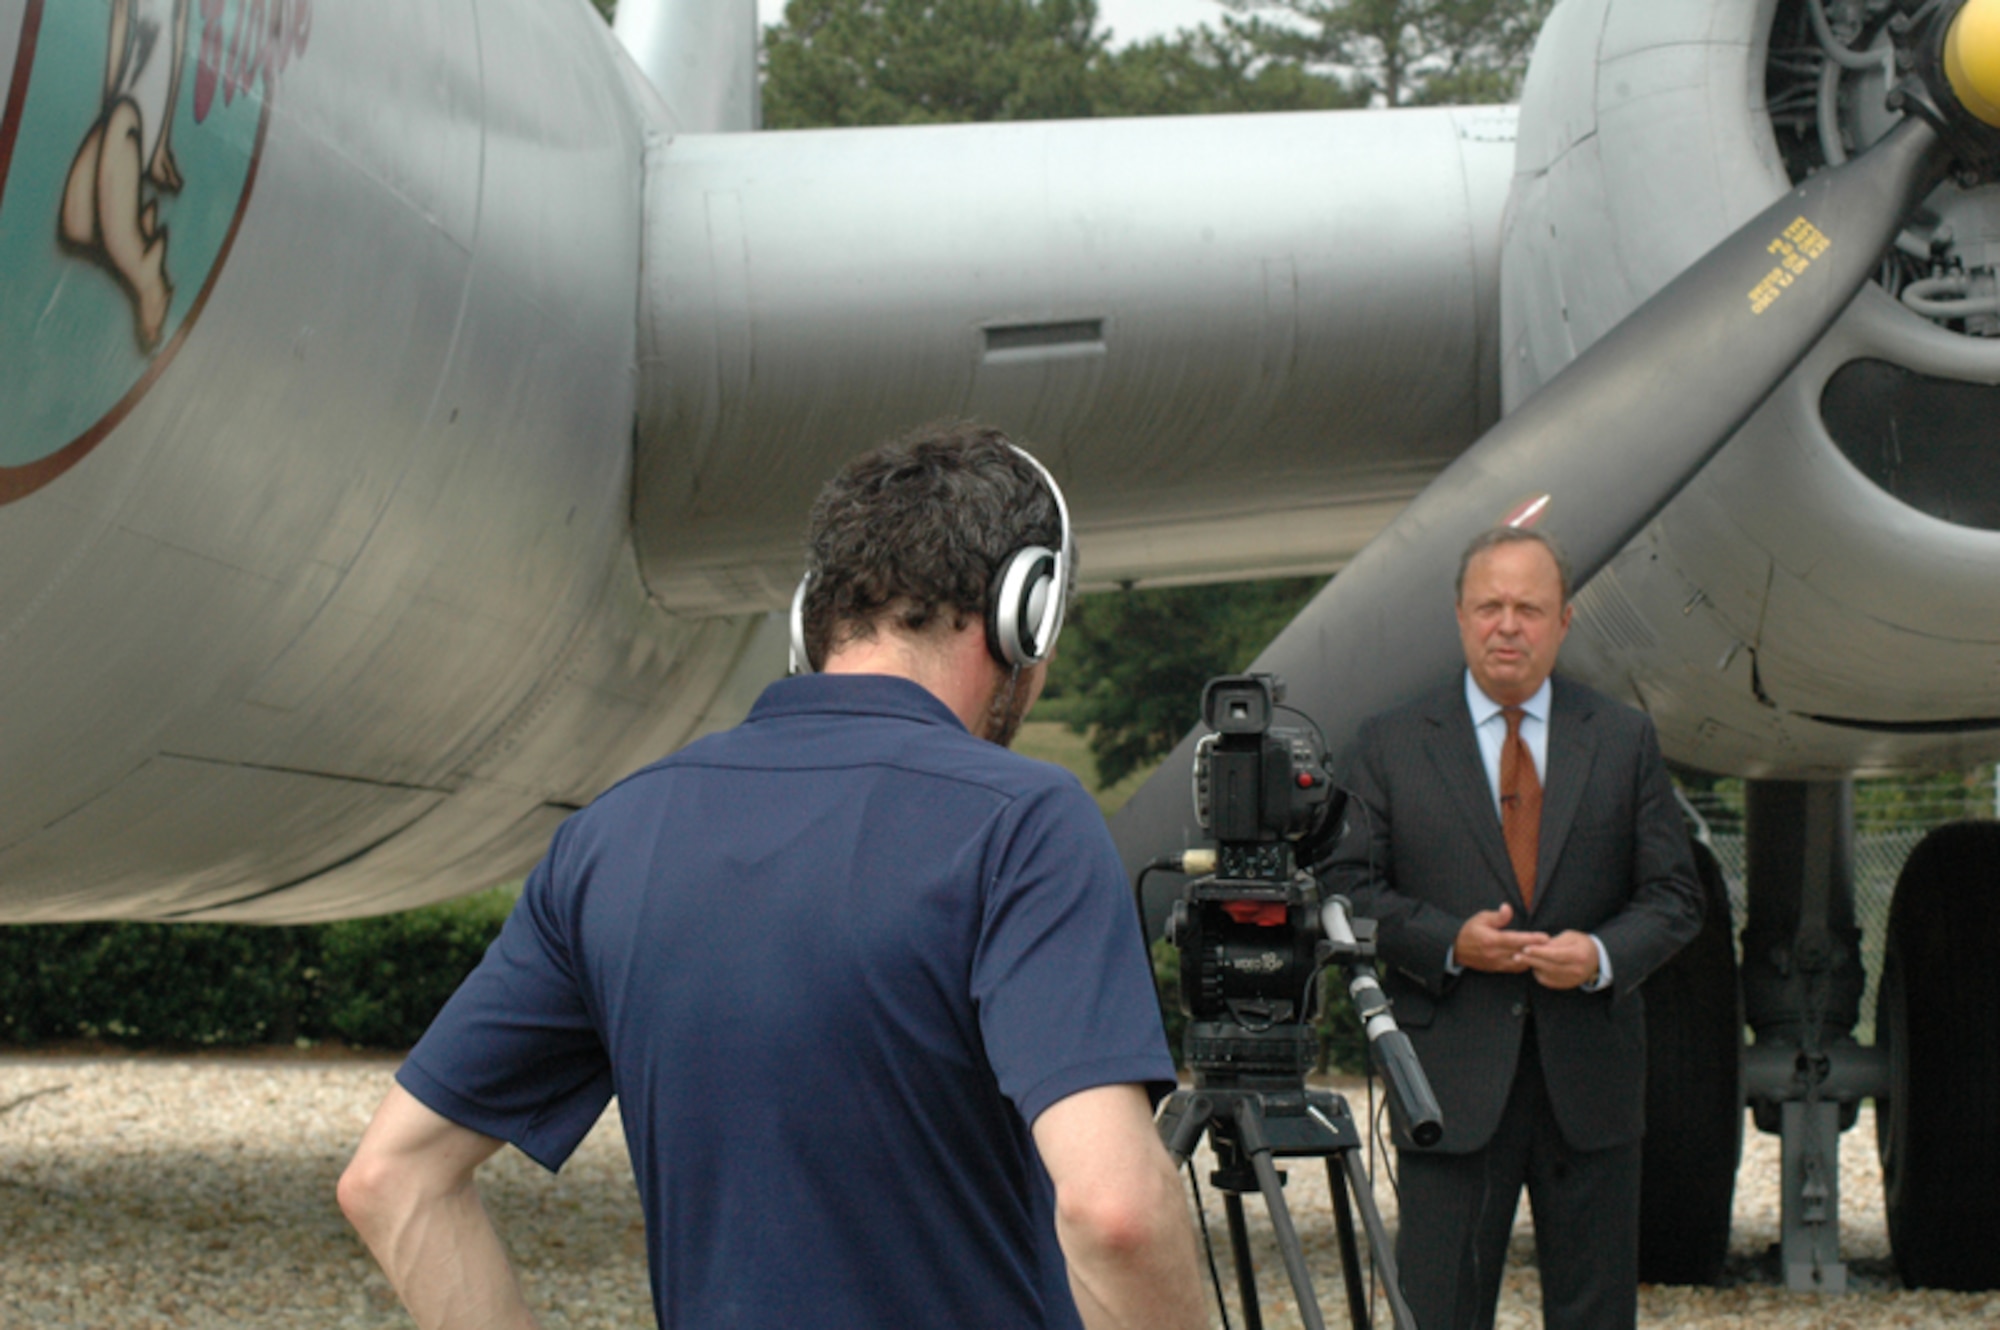 DOBBINS AIR RESERVE BASE, Ga. -- Tom Harrold, chairman of the 60th Berlin Airlift Anniversary Celebration Taskforce, tapes a documentary introduction in front of the historic B-29 Sweet Eloise at Dobbins Air Reserve Base June 19. The documentary highlights the Berlin Airlift 60th Anniversary commemoration held here May 15. (U.S. Air Force photo/Tech. Sgt. James Branch)